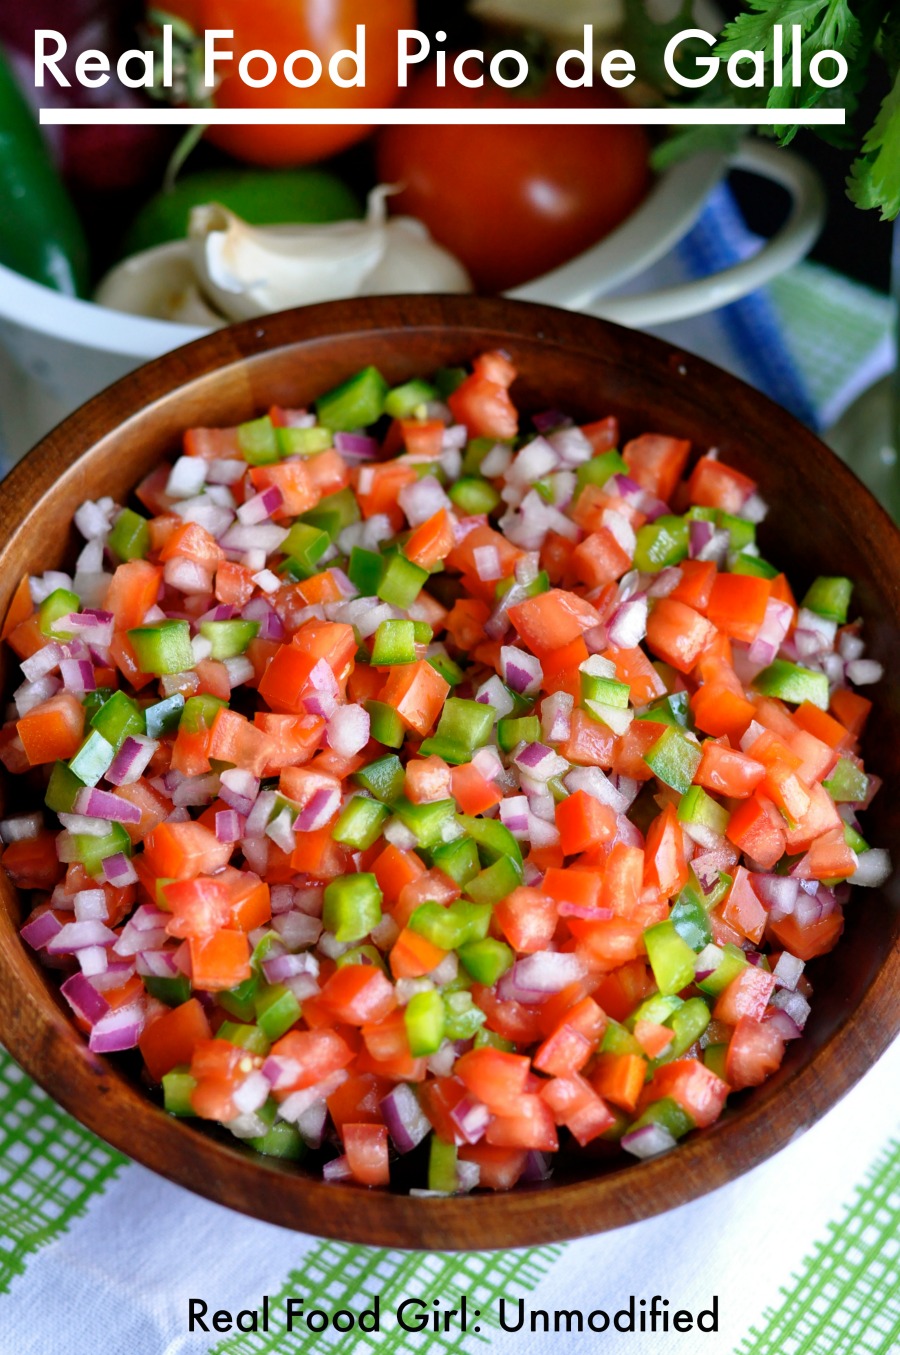 Real Food Pico de Gallo by Real Food Girl: Unmodified. A fresh, bright, basic salsa recipe.